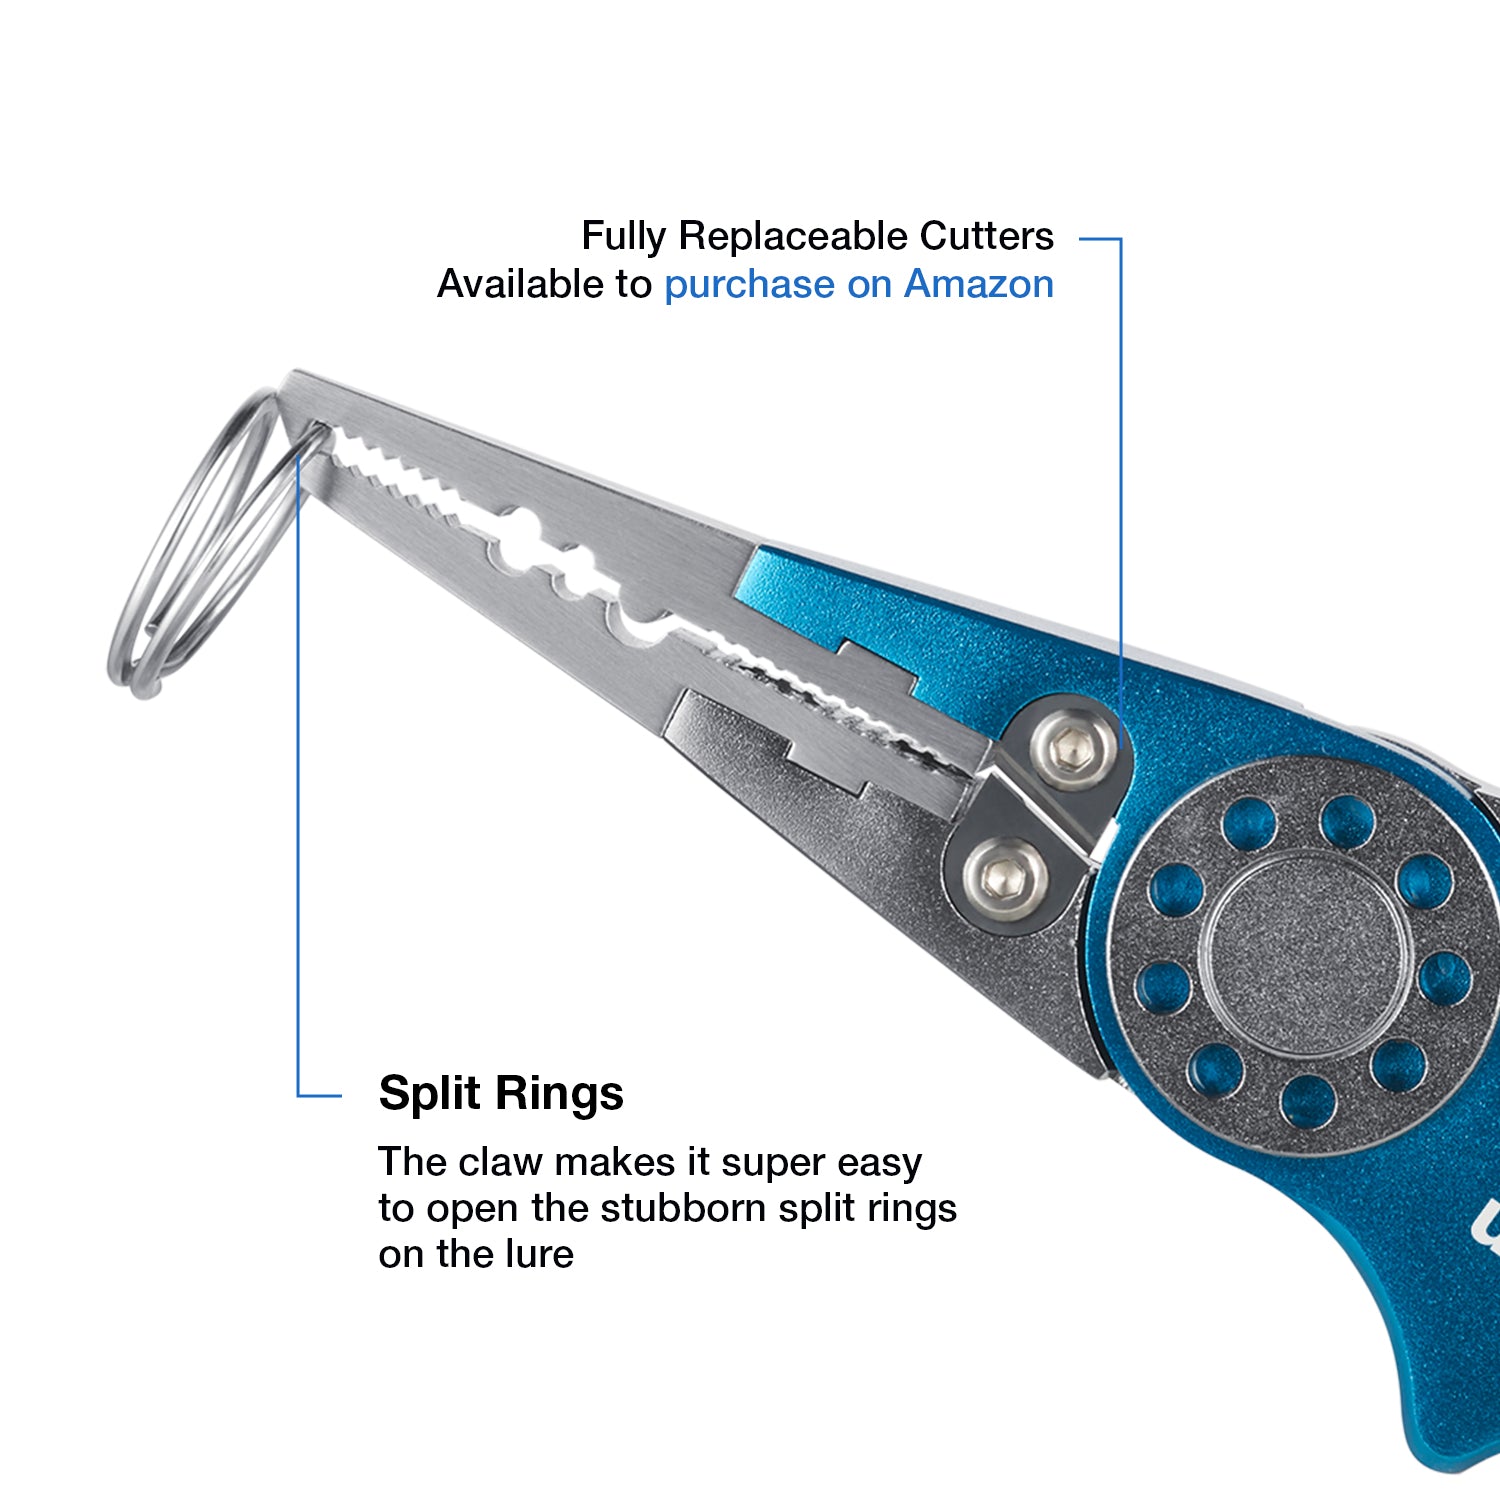 Stainless Steel Fishing Pliers, Fishing Line Cutter, Ring Split Opener,  Tool For Luring Fishing, Check Out Today's Deals Now